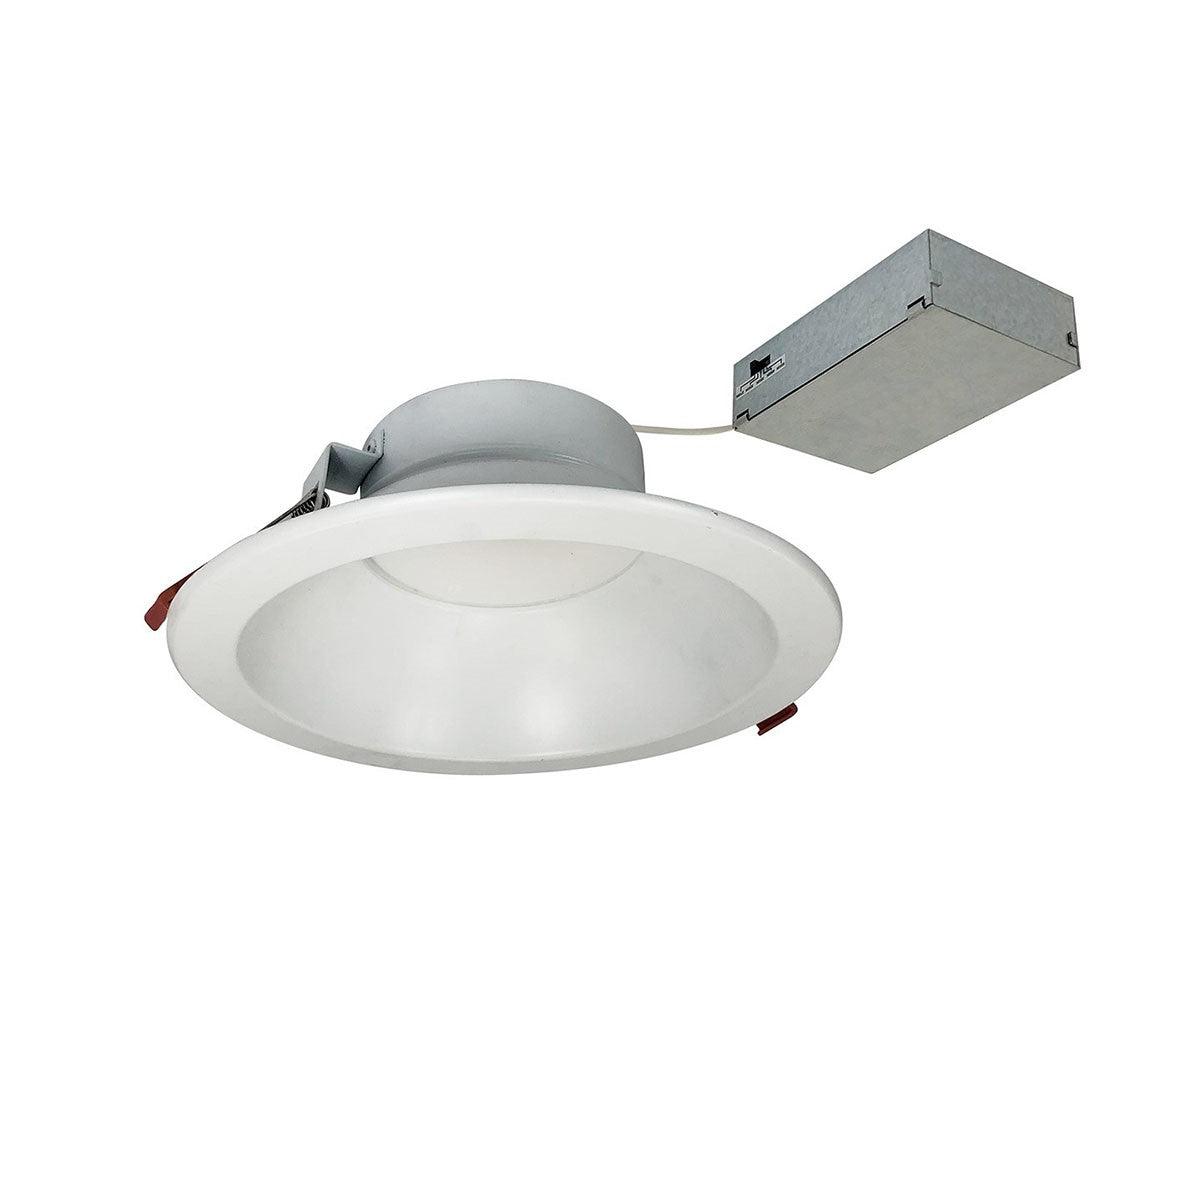 Theia 8 Inch Canless LED Recessed Light, 22 Watt, 2100 Lumens, Selectable CCT, 2700K to 5000K, Matte Powder White Finish - Bees Lighting